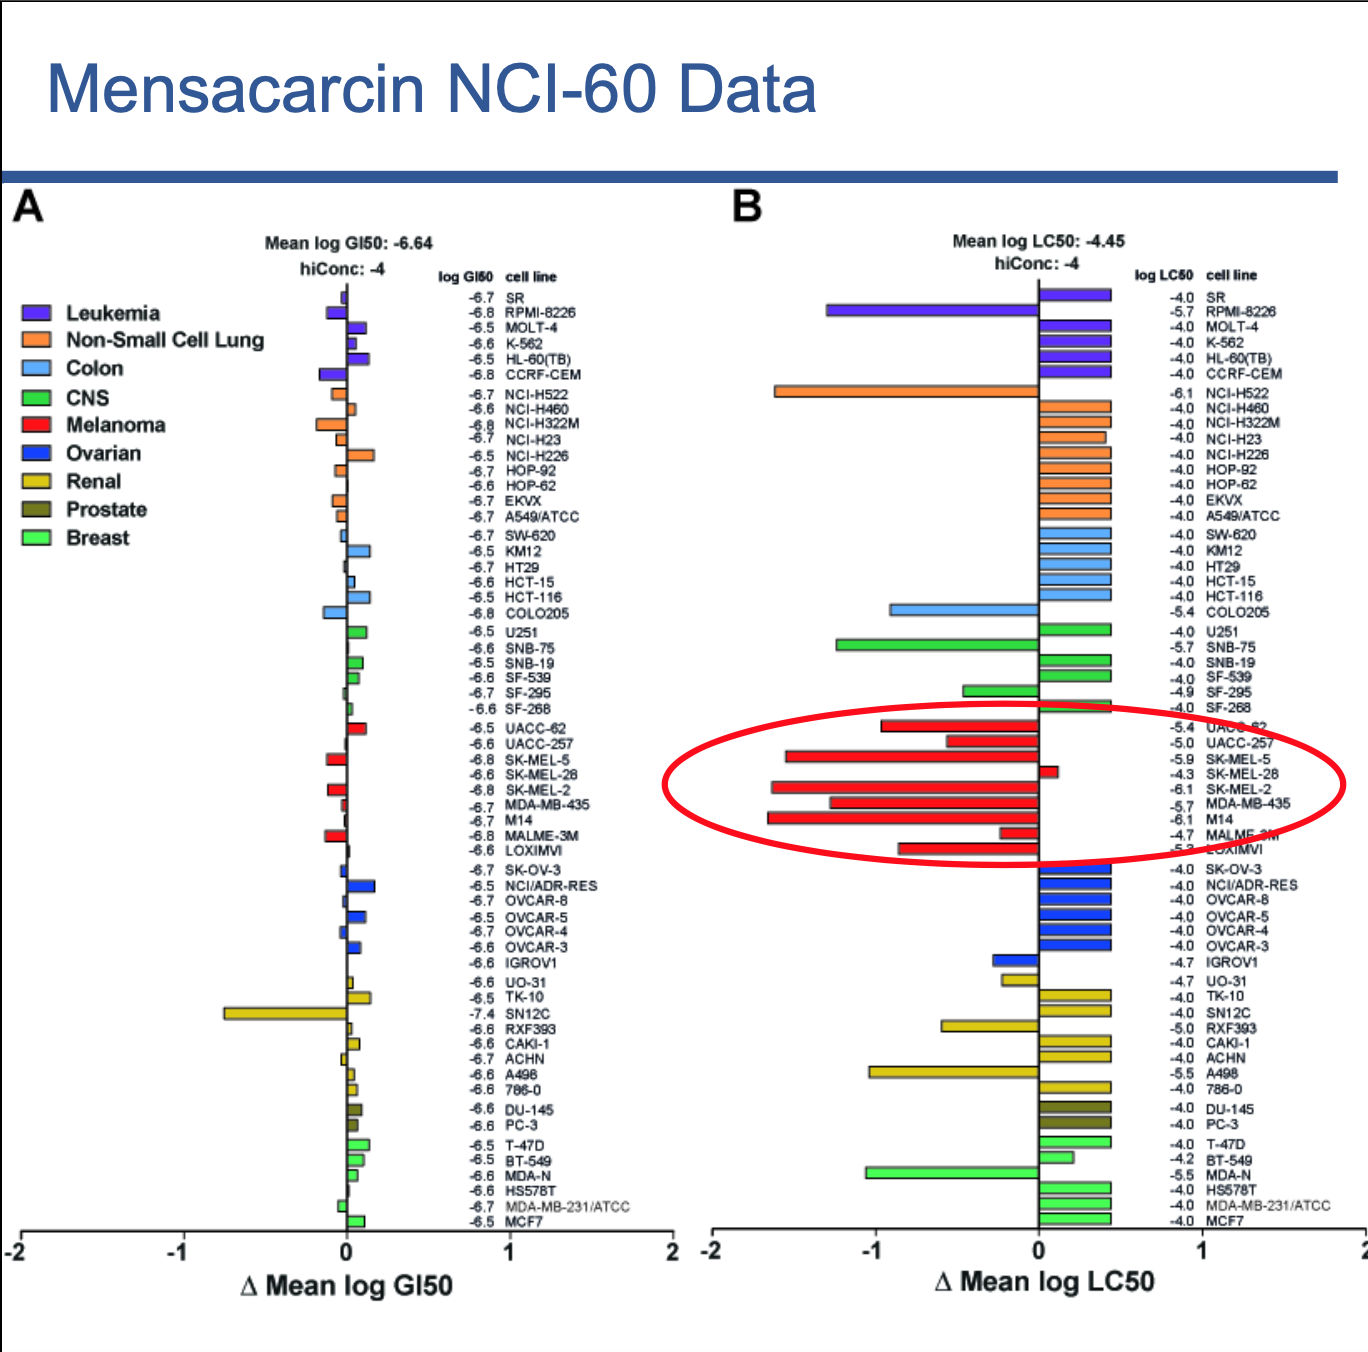 Response of cancer cell lines when screened against mensacarcin. The circled red bars indicate that mensacarcin specifically kills melanoma cancer cells.